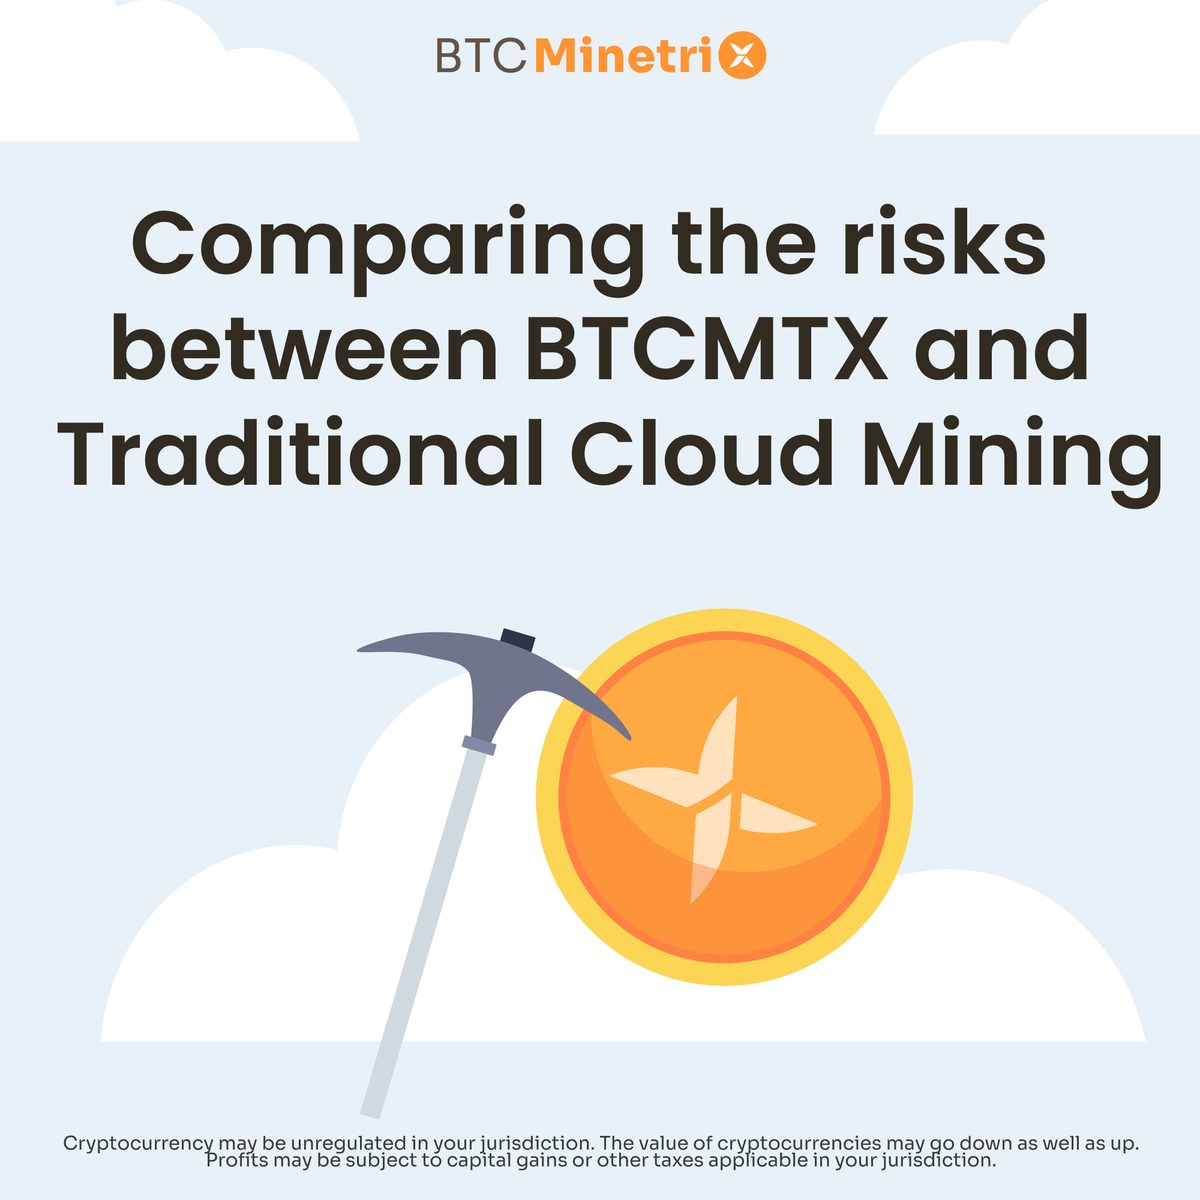 Exploring the different risk factors between #BitcoinMinetrix and Traditional Cloud Mining! ⚖️ 

#BTCMTX: User-managed, flexible withdrawal and selling.

Traditional: No reimbursements, locked-in contracts.

#CryptoComparison #MiningInnovation